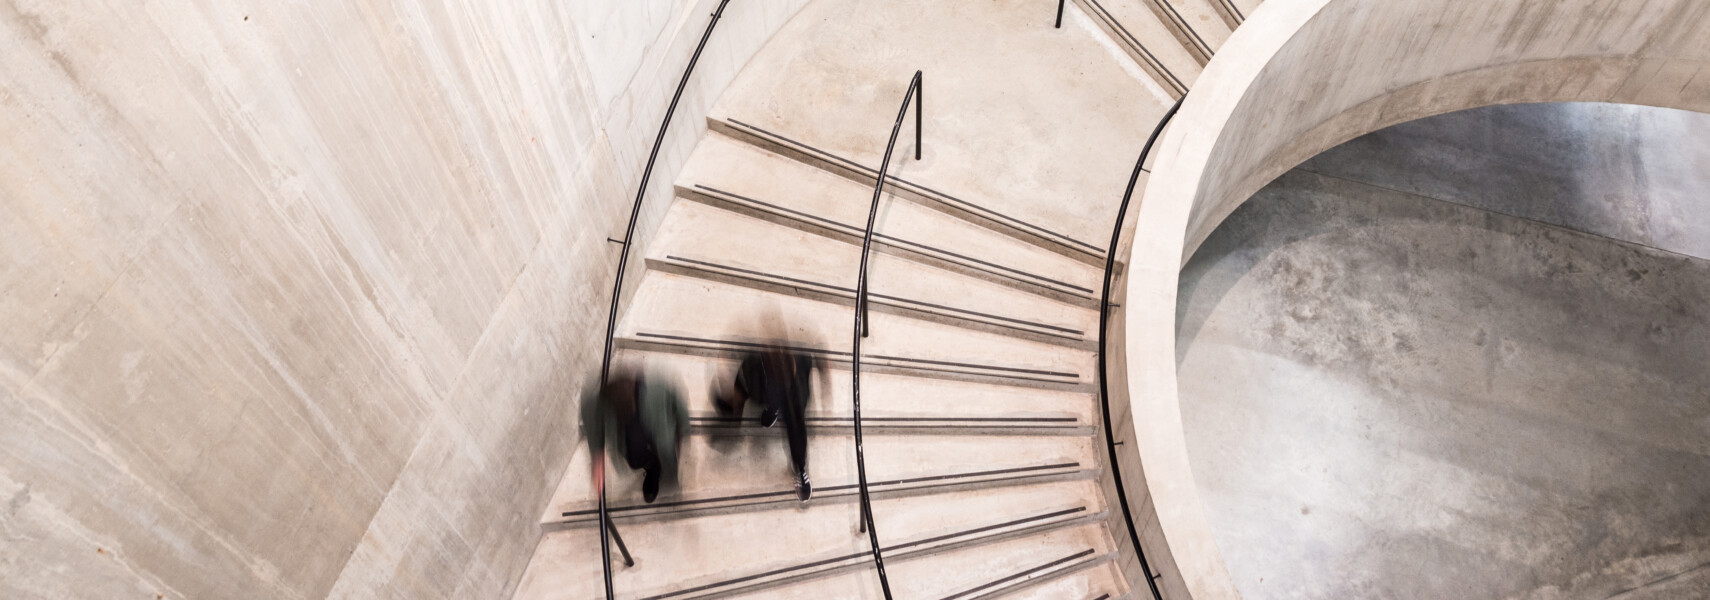 Blurred Motion Of People On Spiral Staircase